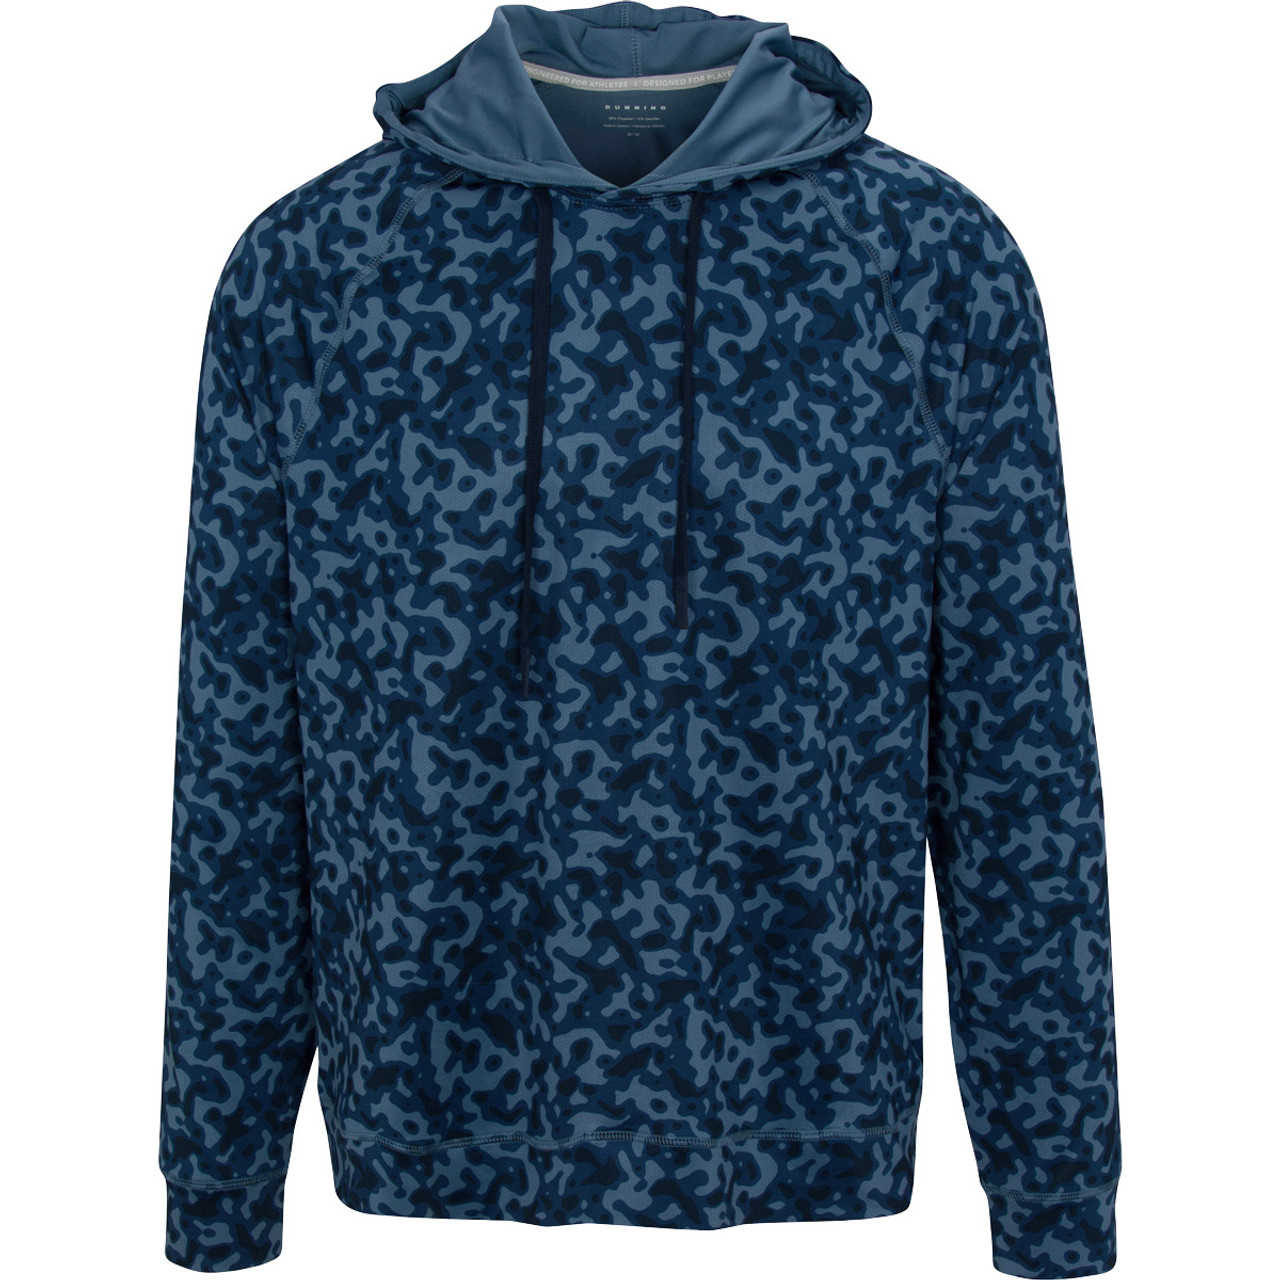 Quest Ventilated Camouflage Performance Hoodie: Navy Halo Camo - Dunning